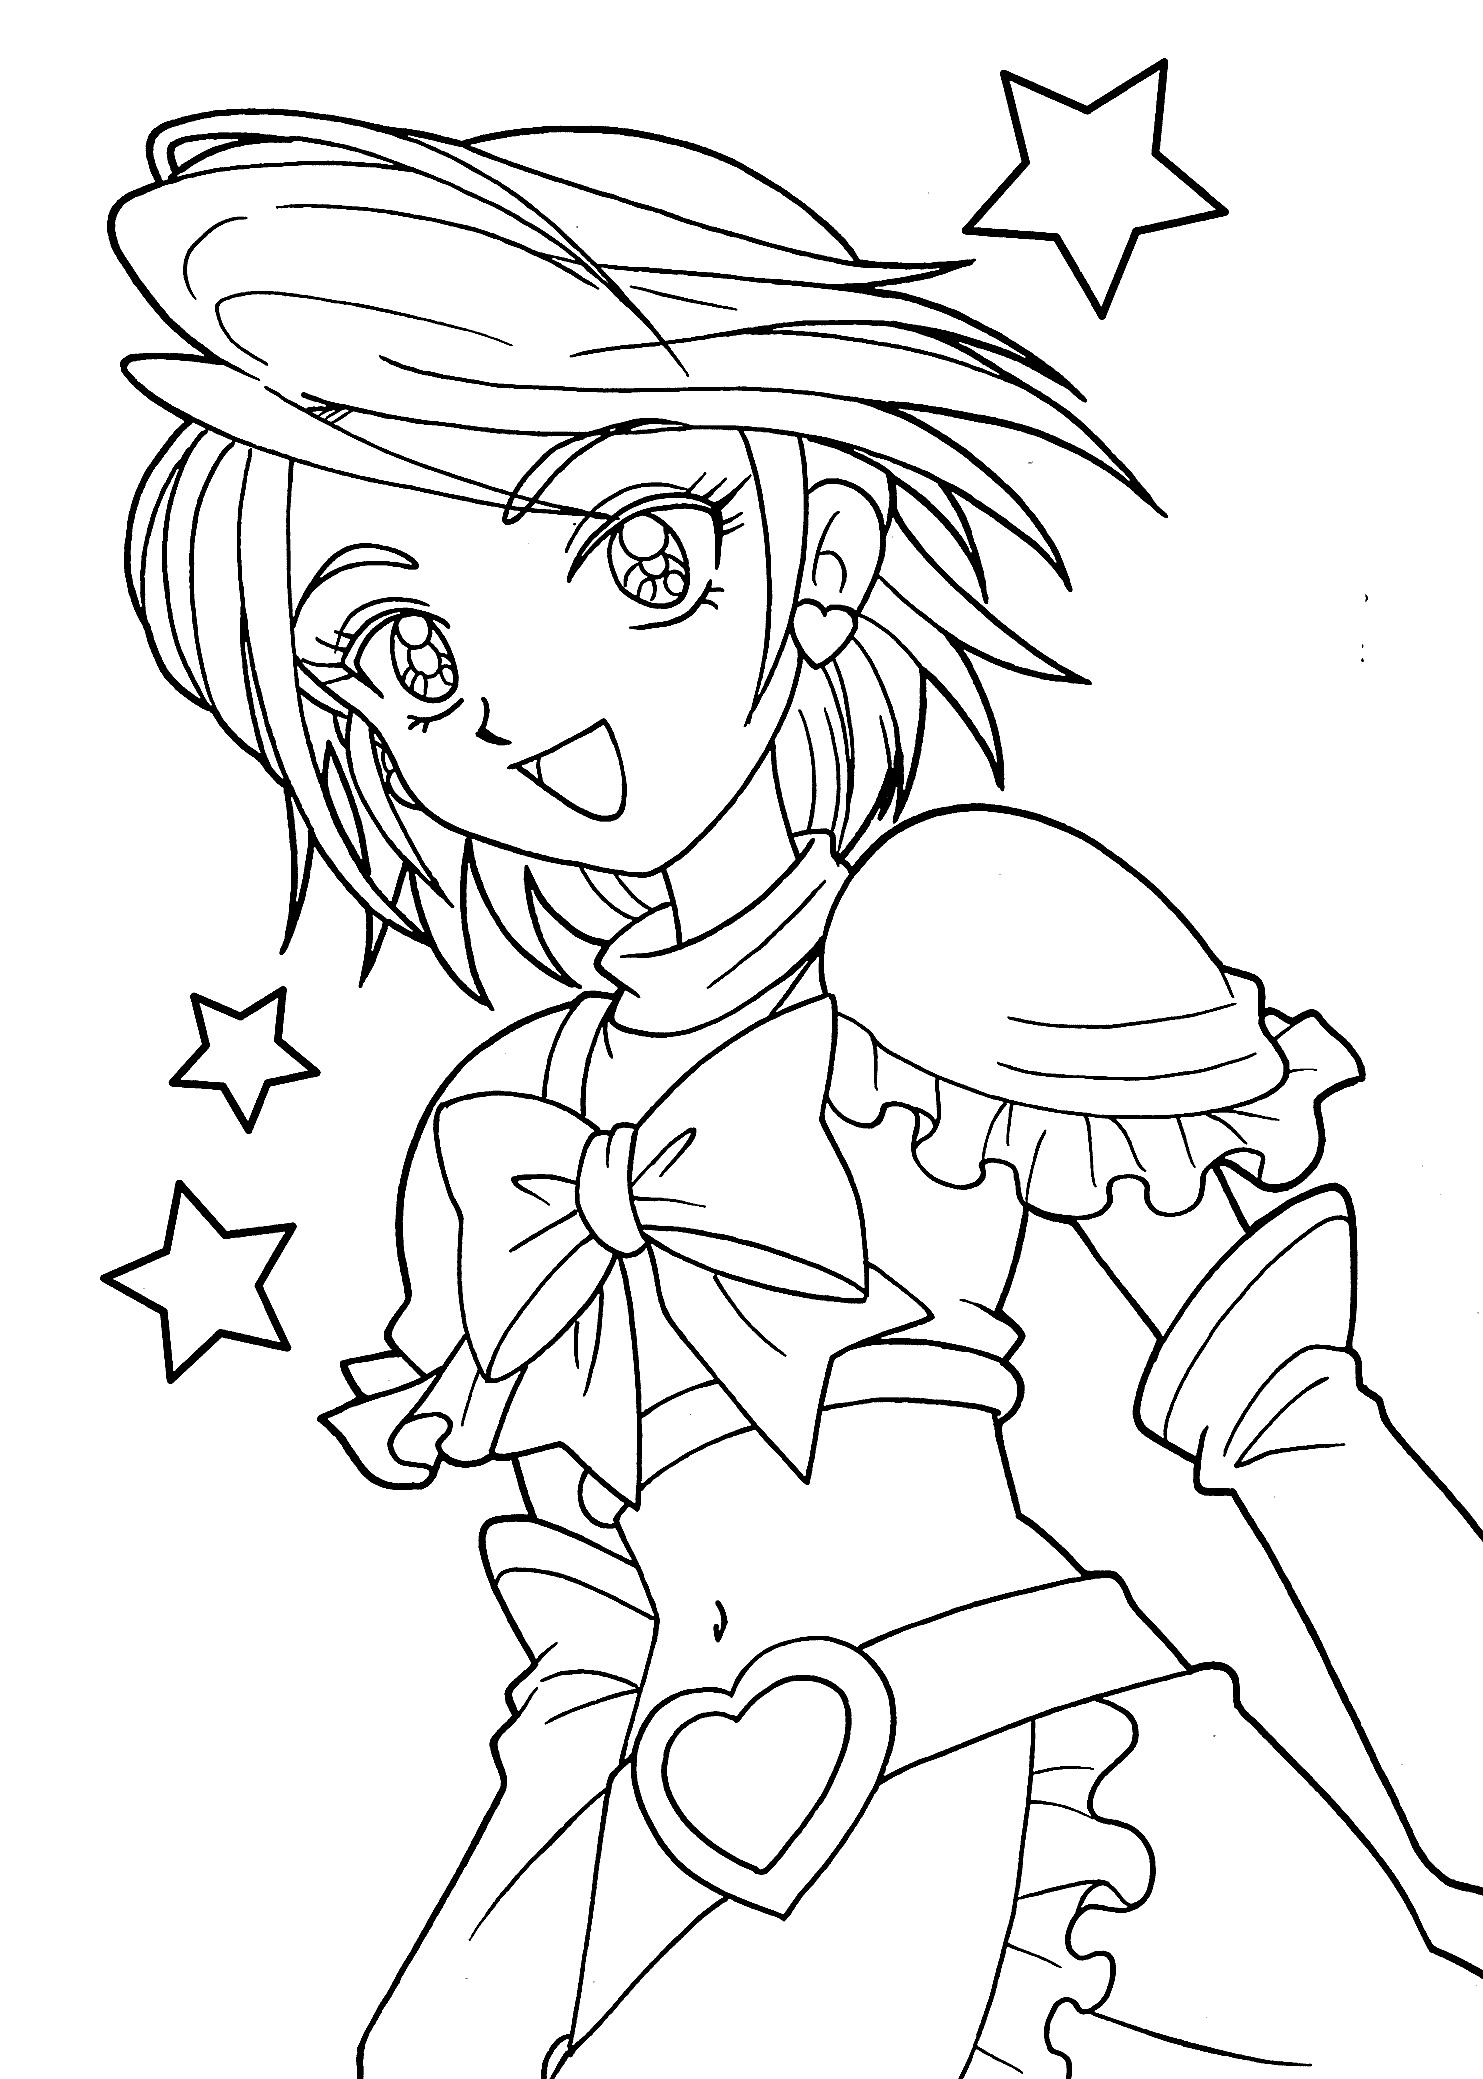 Free Coloring Sheets Girls
 13 Best of Anime Girl Coloring Pages Bestofcoloring